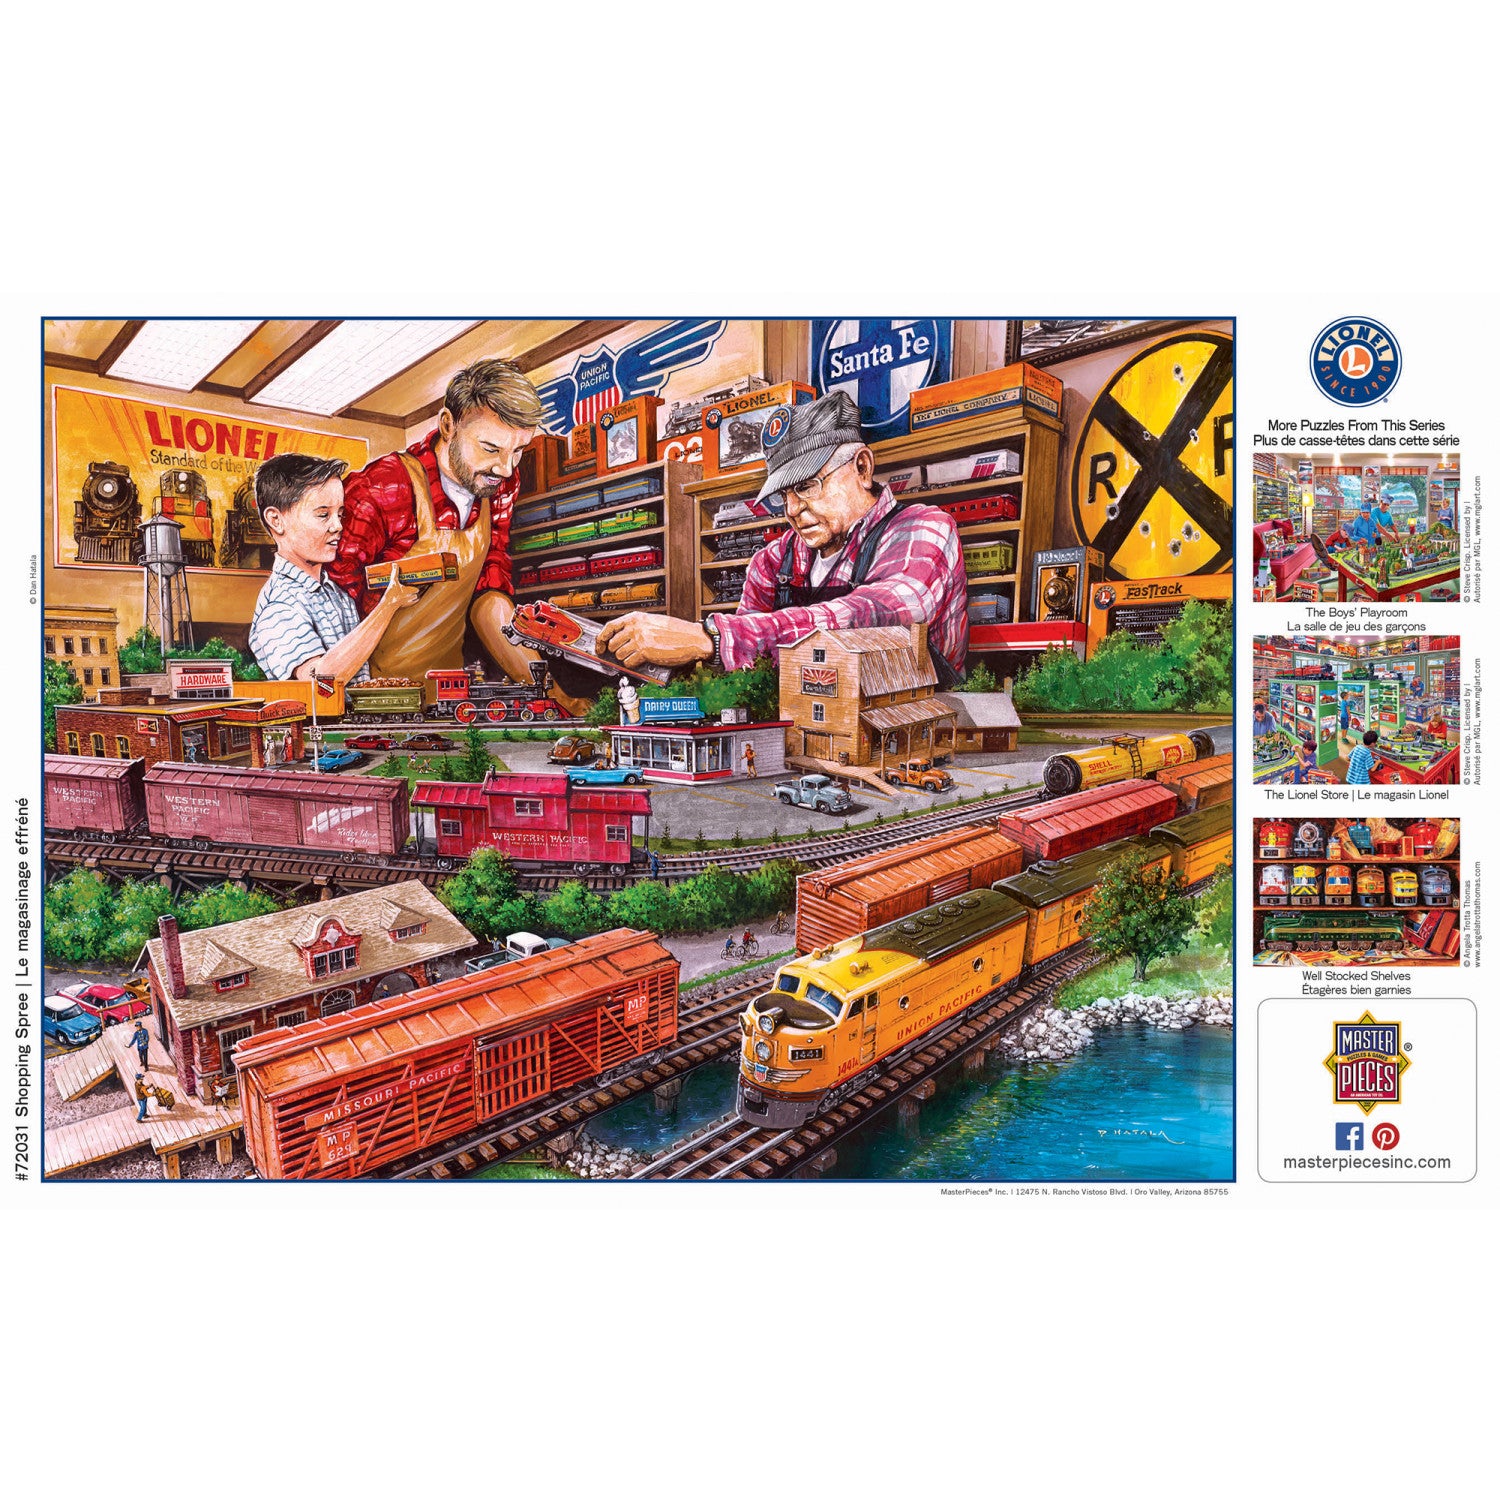 Lionel Trains - Shopping Spree 1000 Piece Jigsaw Puzzle